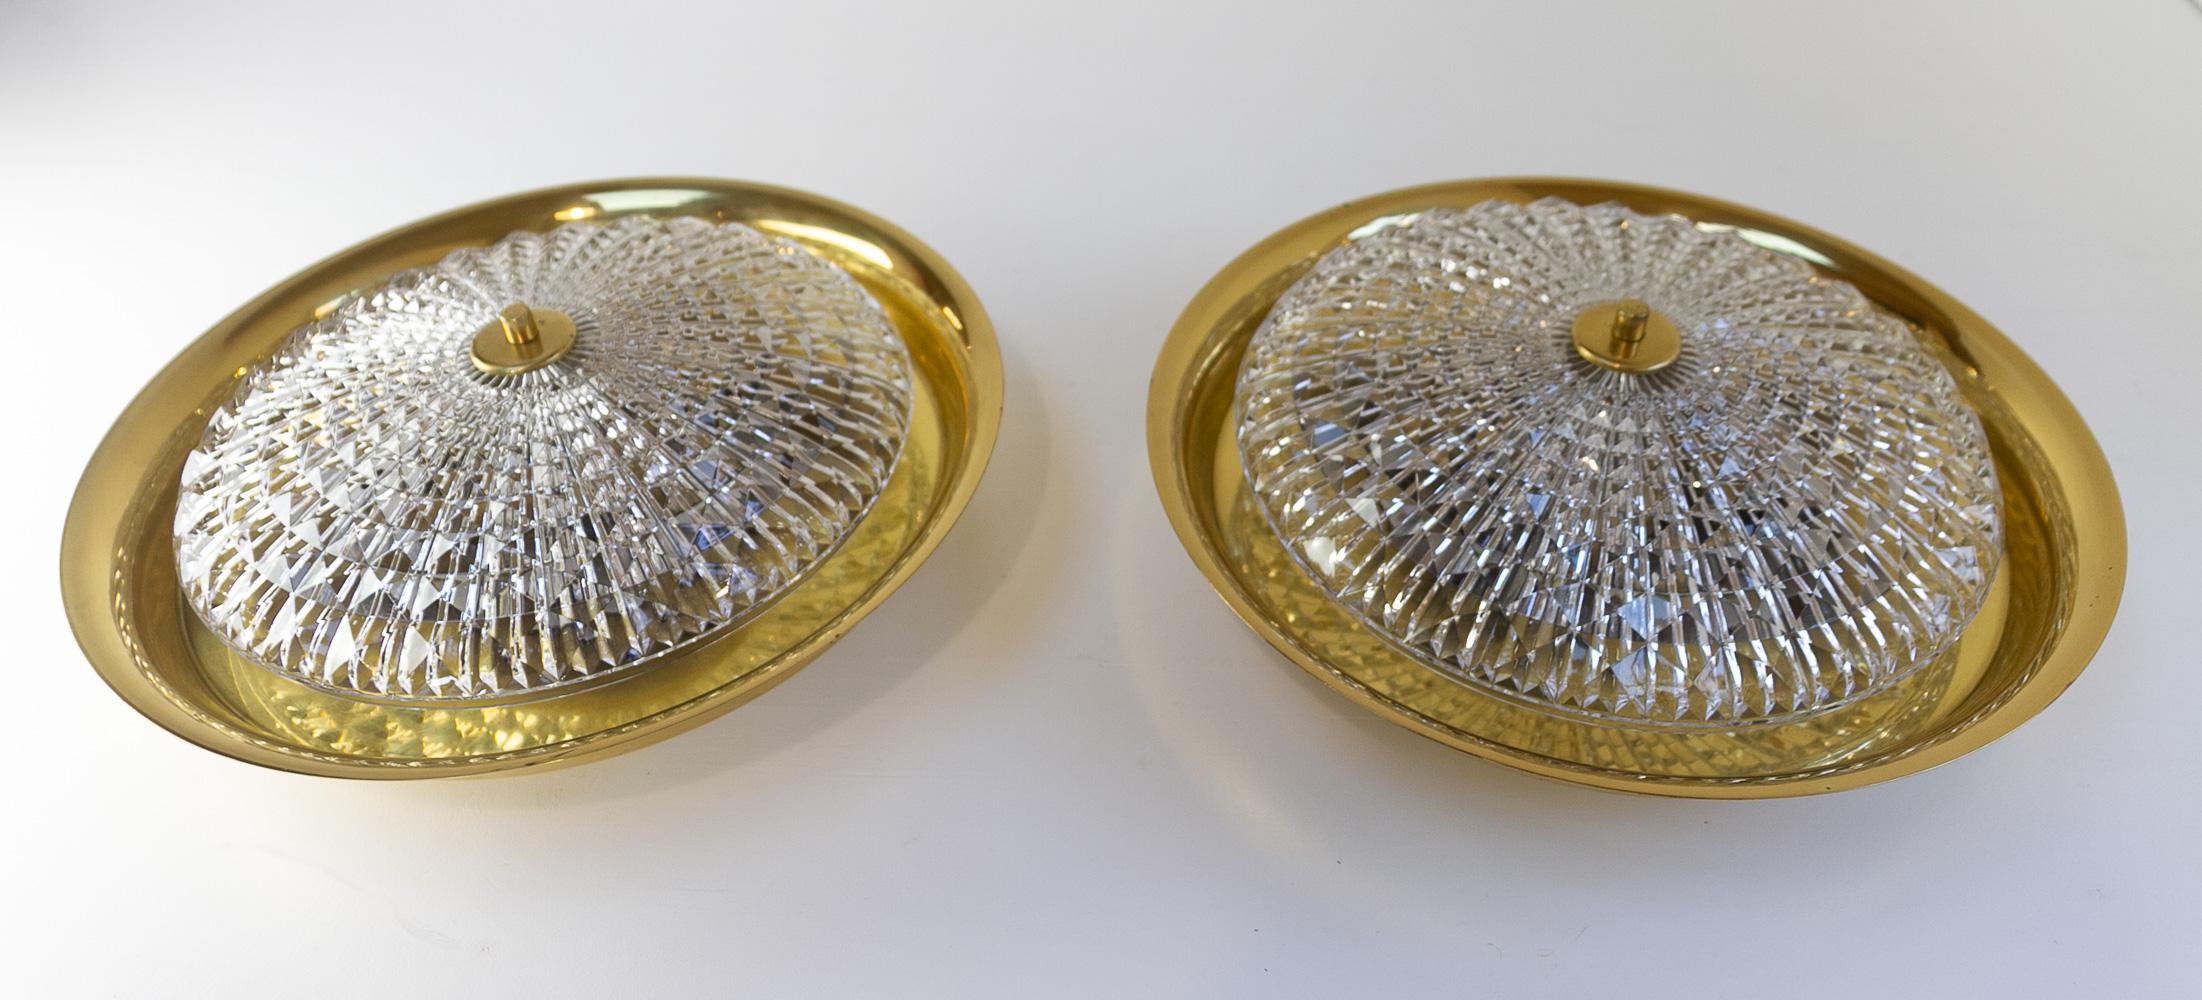 Orrefors Wall or Ceiling Lamps by Fagerlund for Lyfa, 1960s. Set of 2.
Pair of Scandinavian Mid-Century Modern lights with clear textured thick crystal shade and brass body.
Produced by Lyfa Denmark, designed by Carl Fagerlund and crystal glass